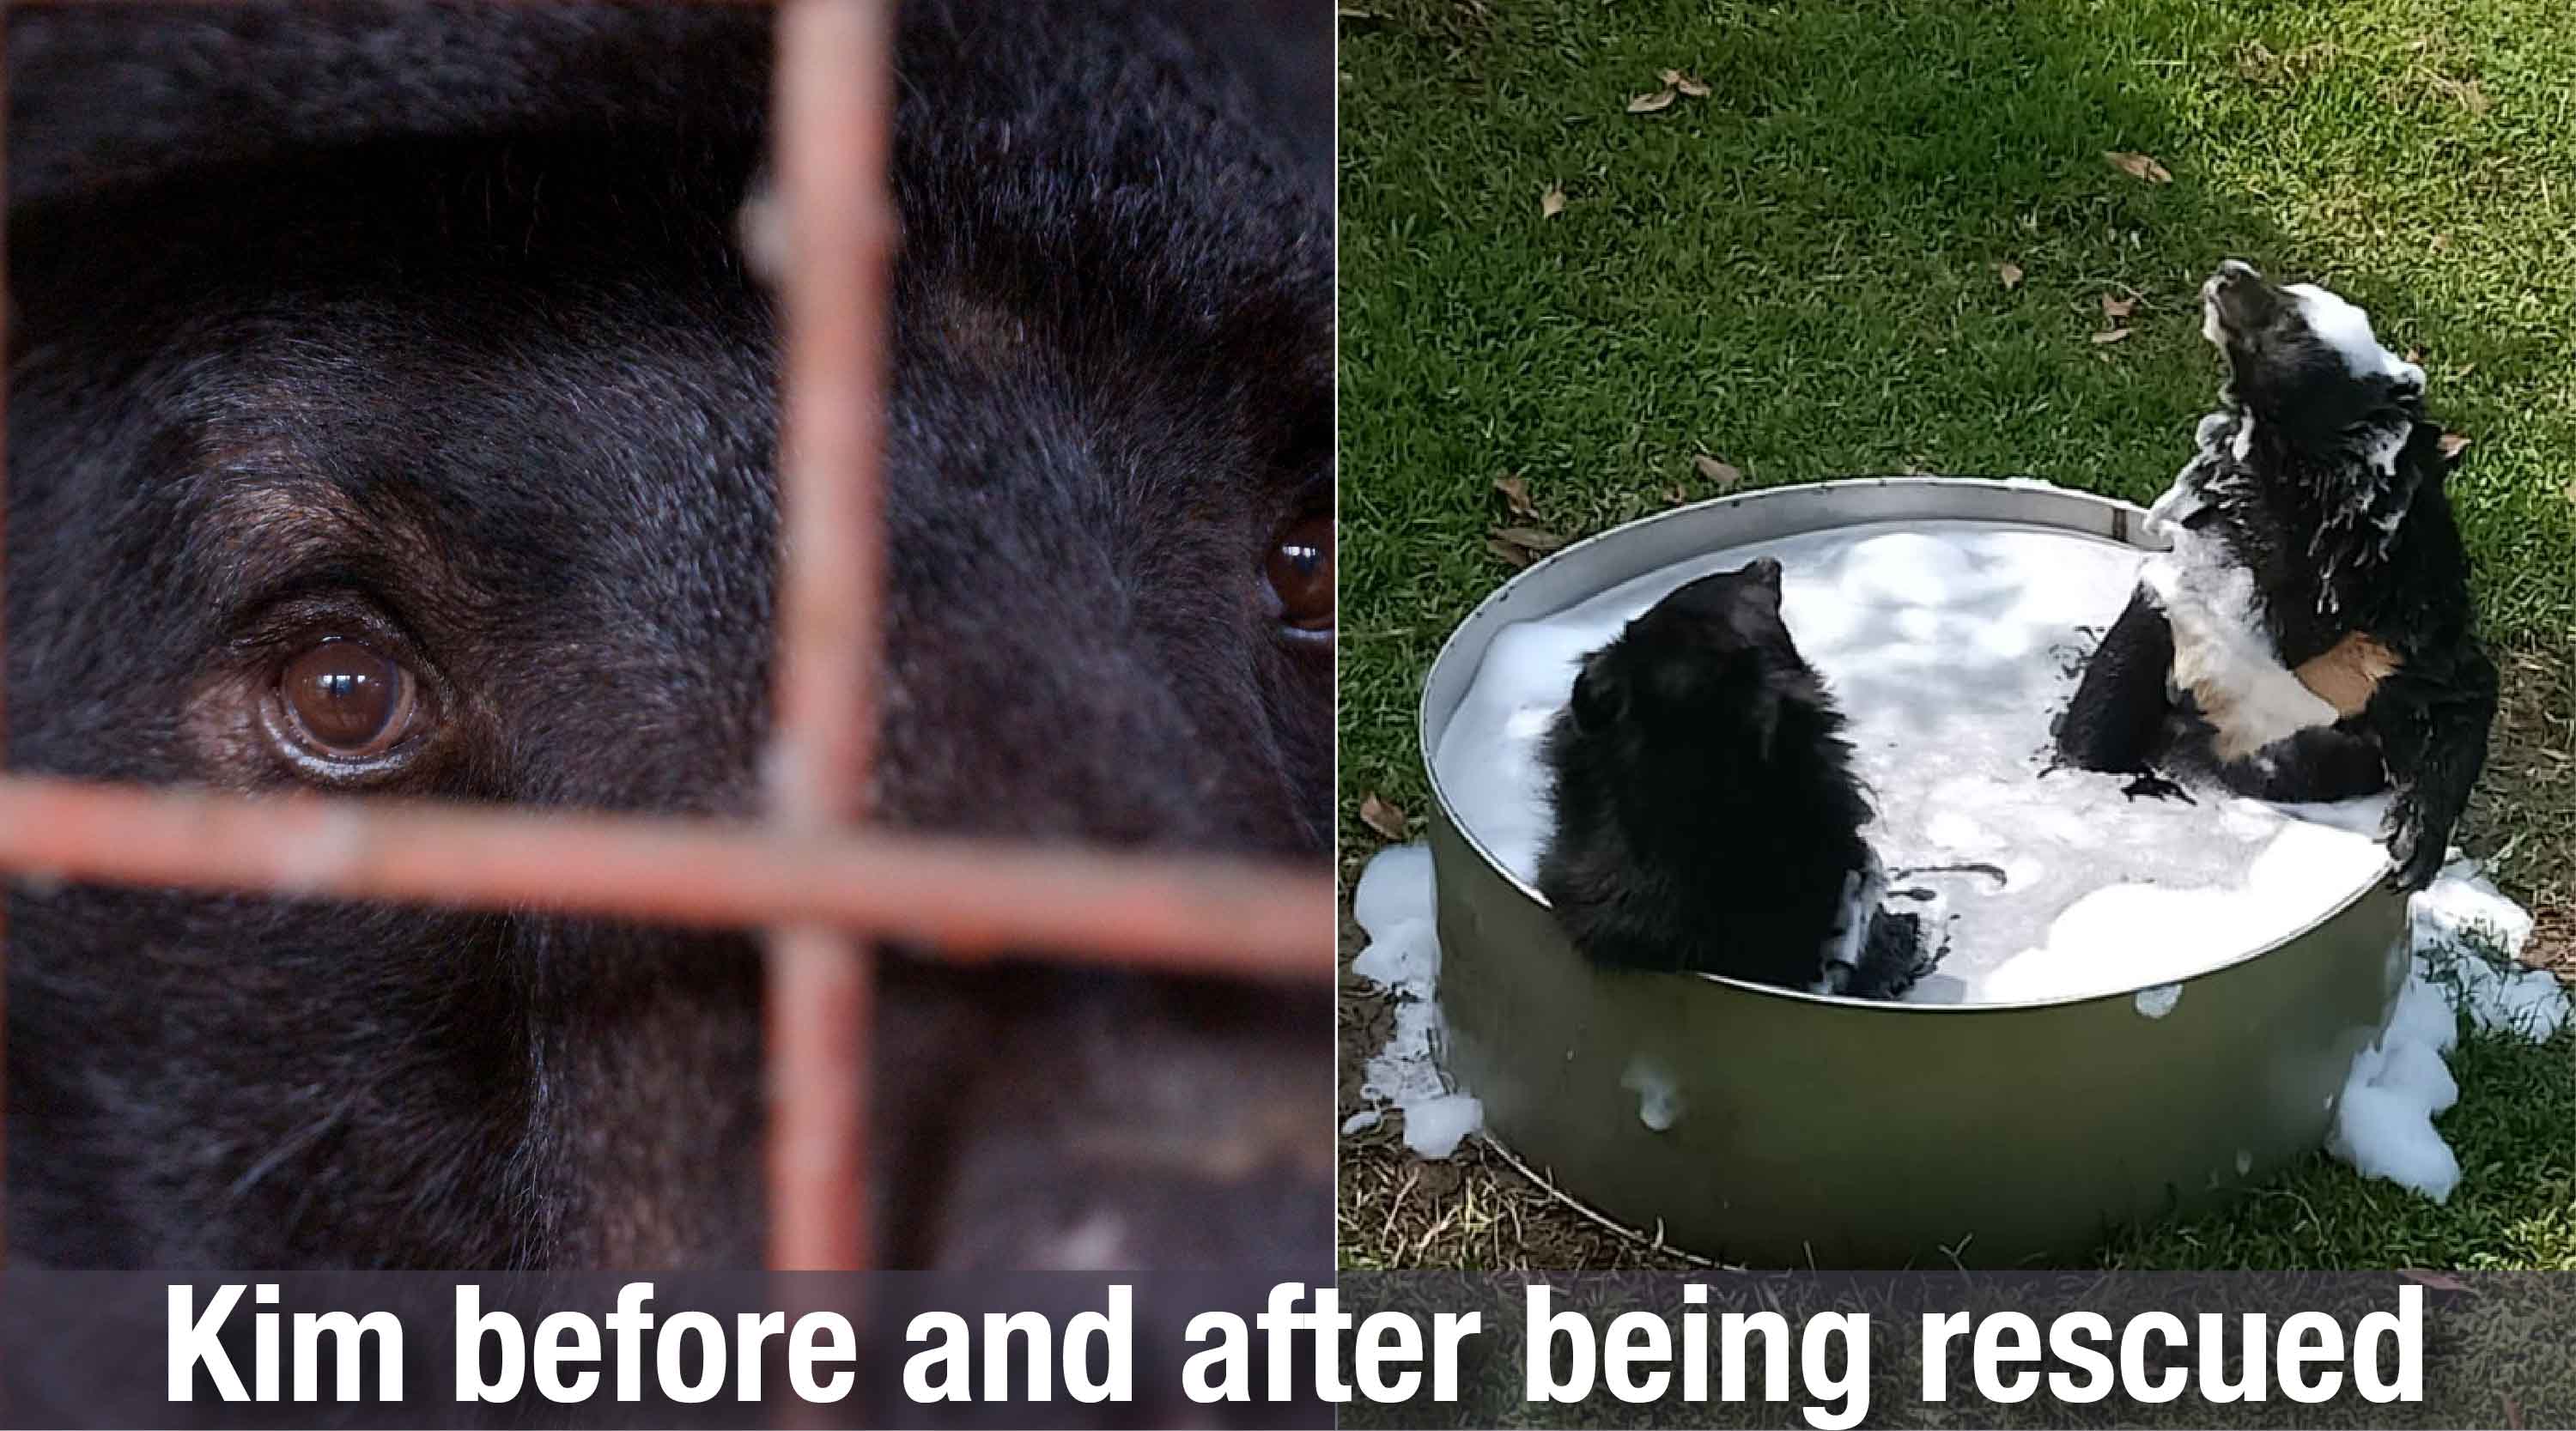 After rescue from cruelty, moon bear best friends enjoy a sanctuary spa day